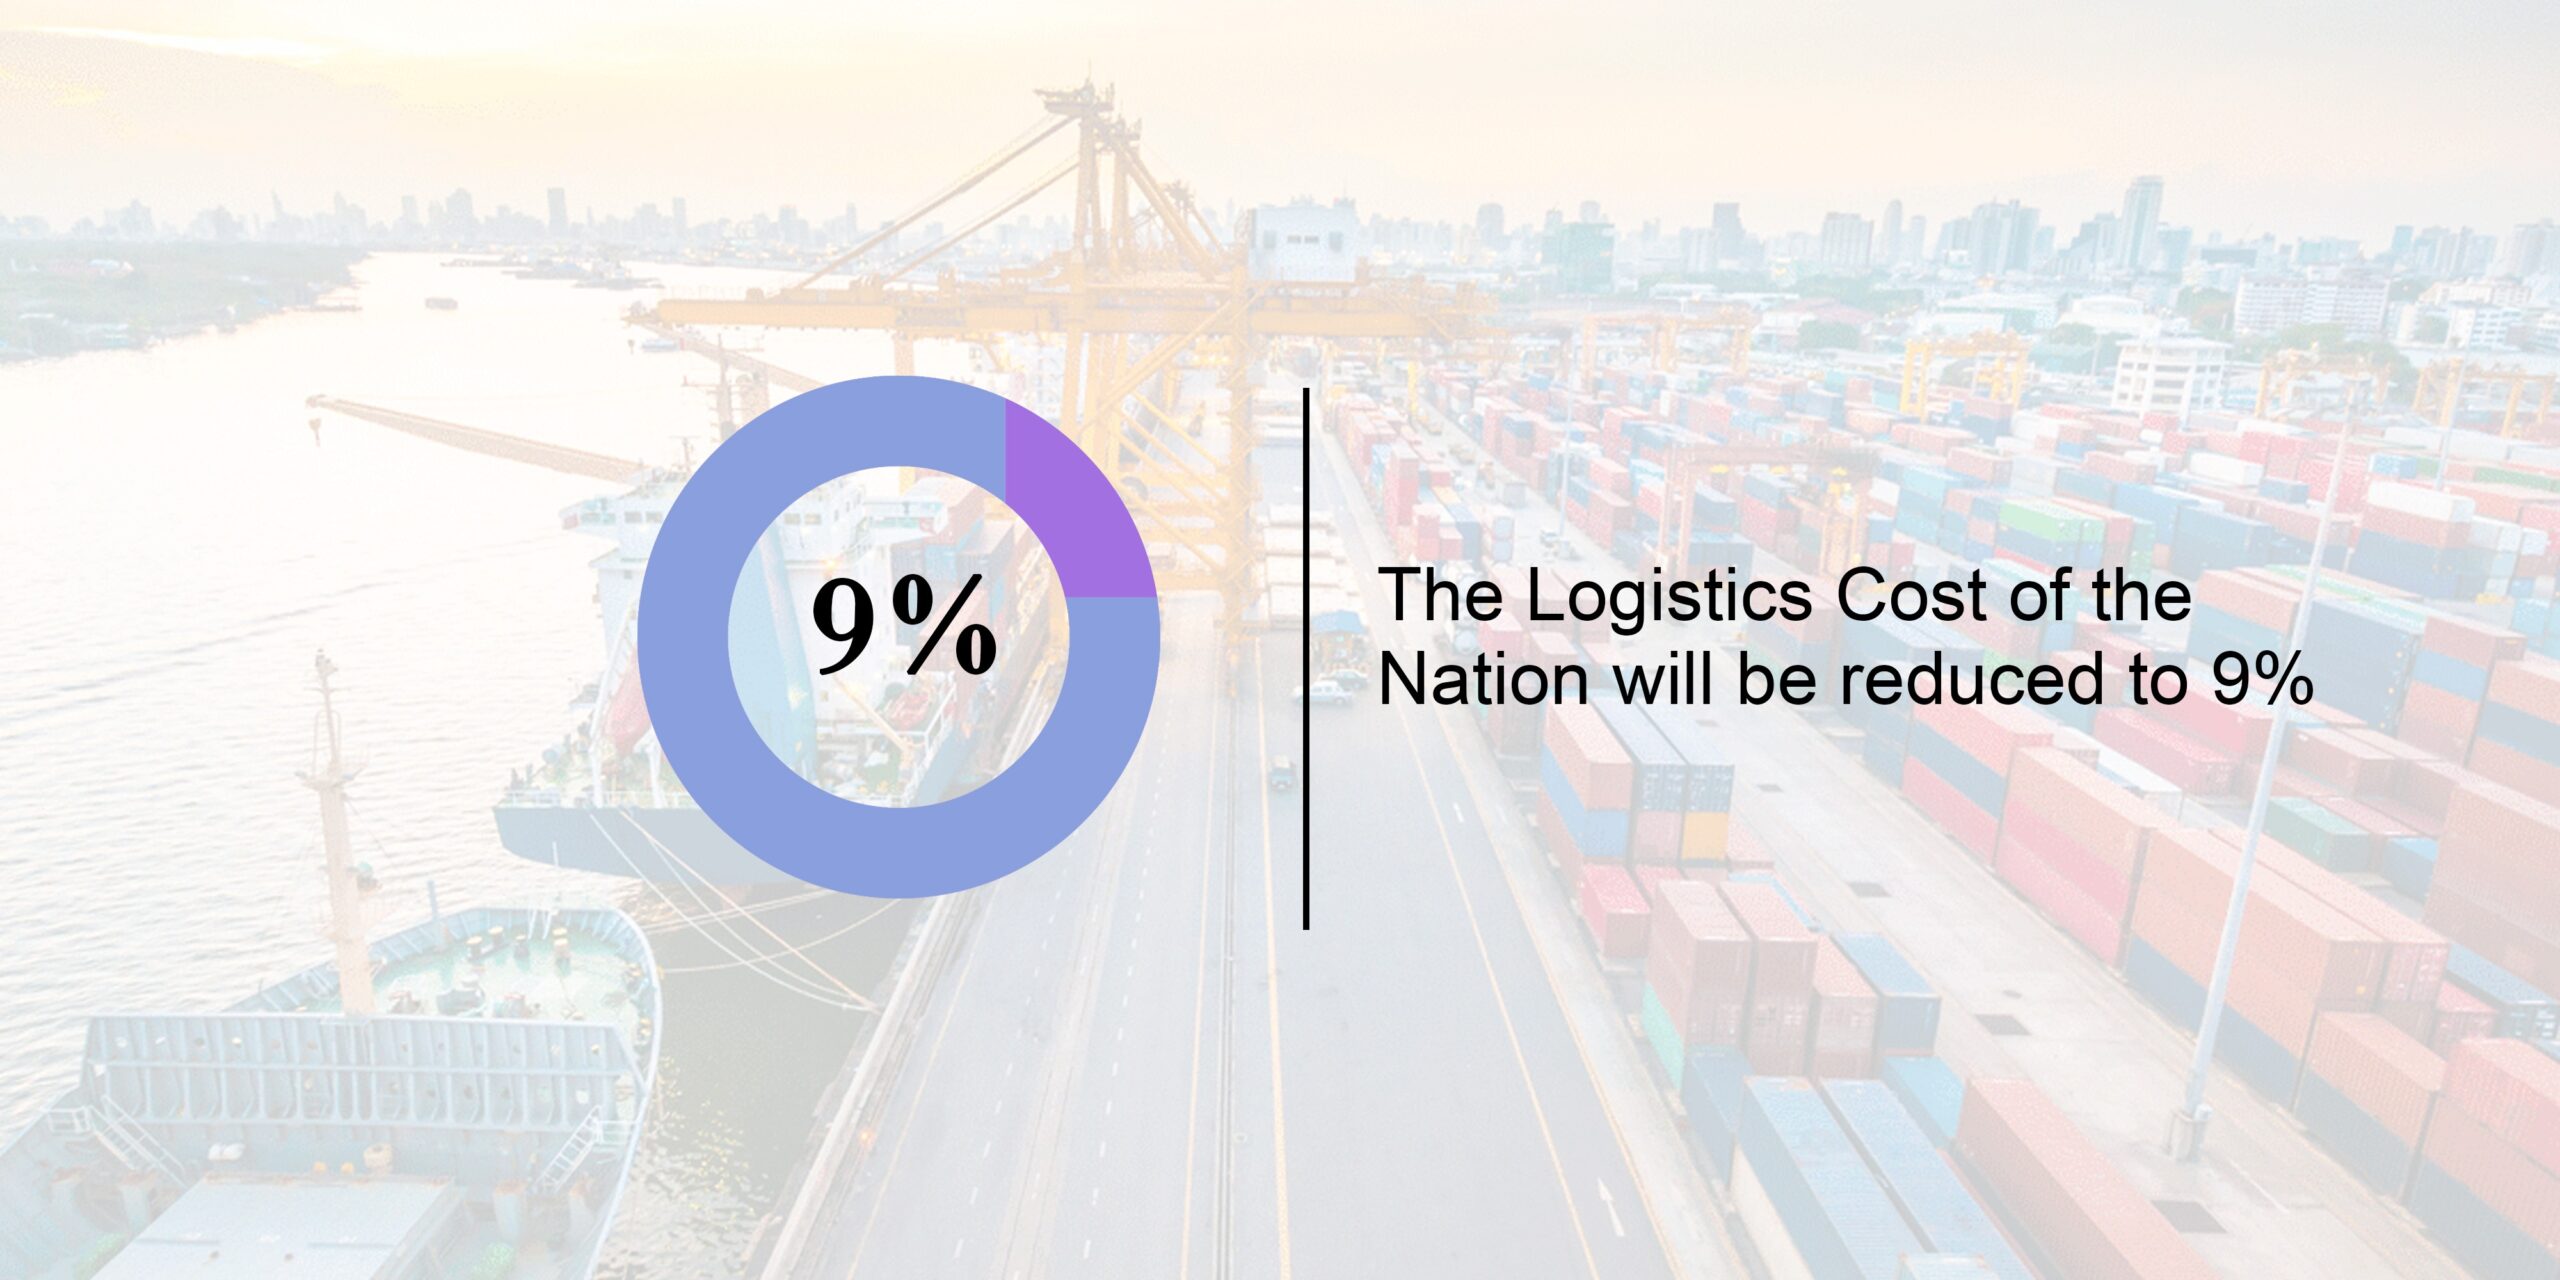 The Logistics Cost of the Nation will be reduced to 9%